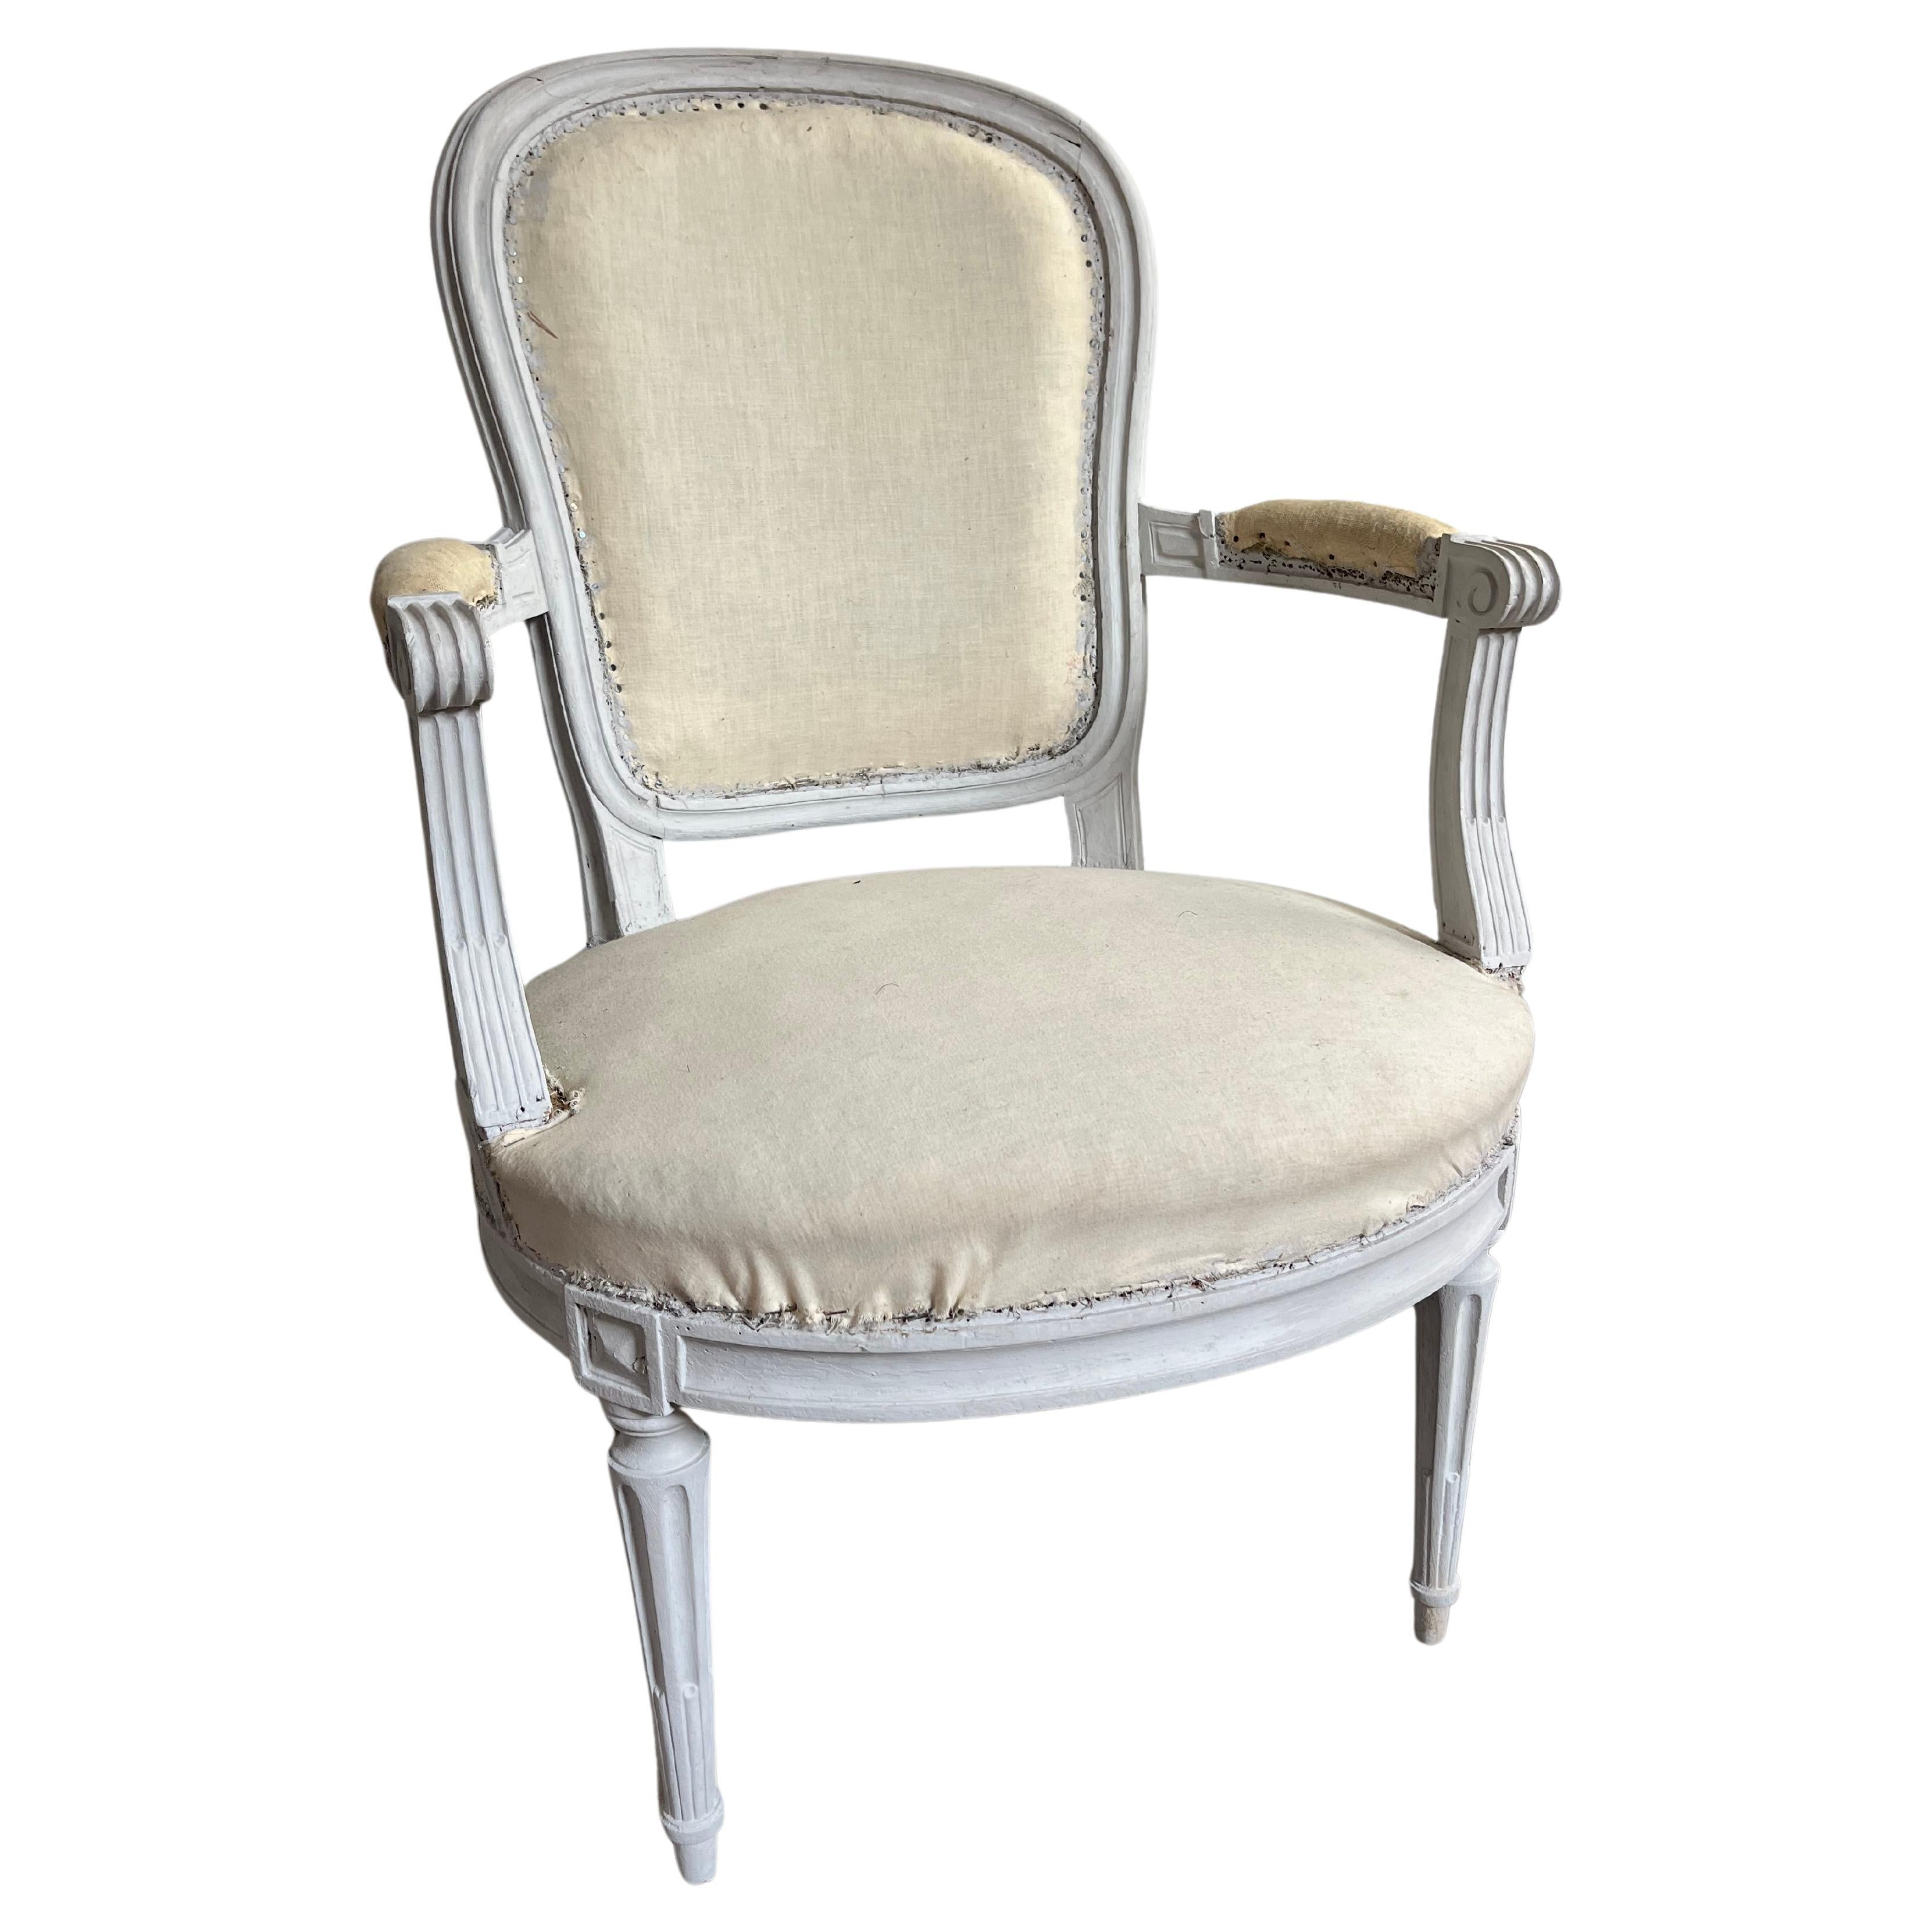 A set of 6 Louis XVI Period fauteuils circa 1790 with medallion backs and fluted legs, in light grey painted finish, recently upholstered and ready for cover fabric. Each chair is signed on the seat stretcher “F. Lapierre a Lyon”. Can be used as